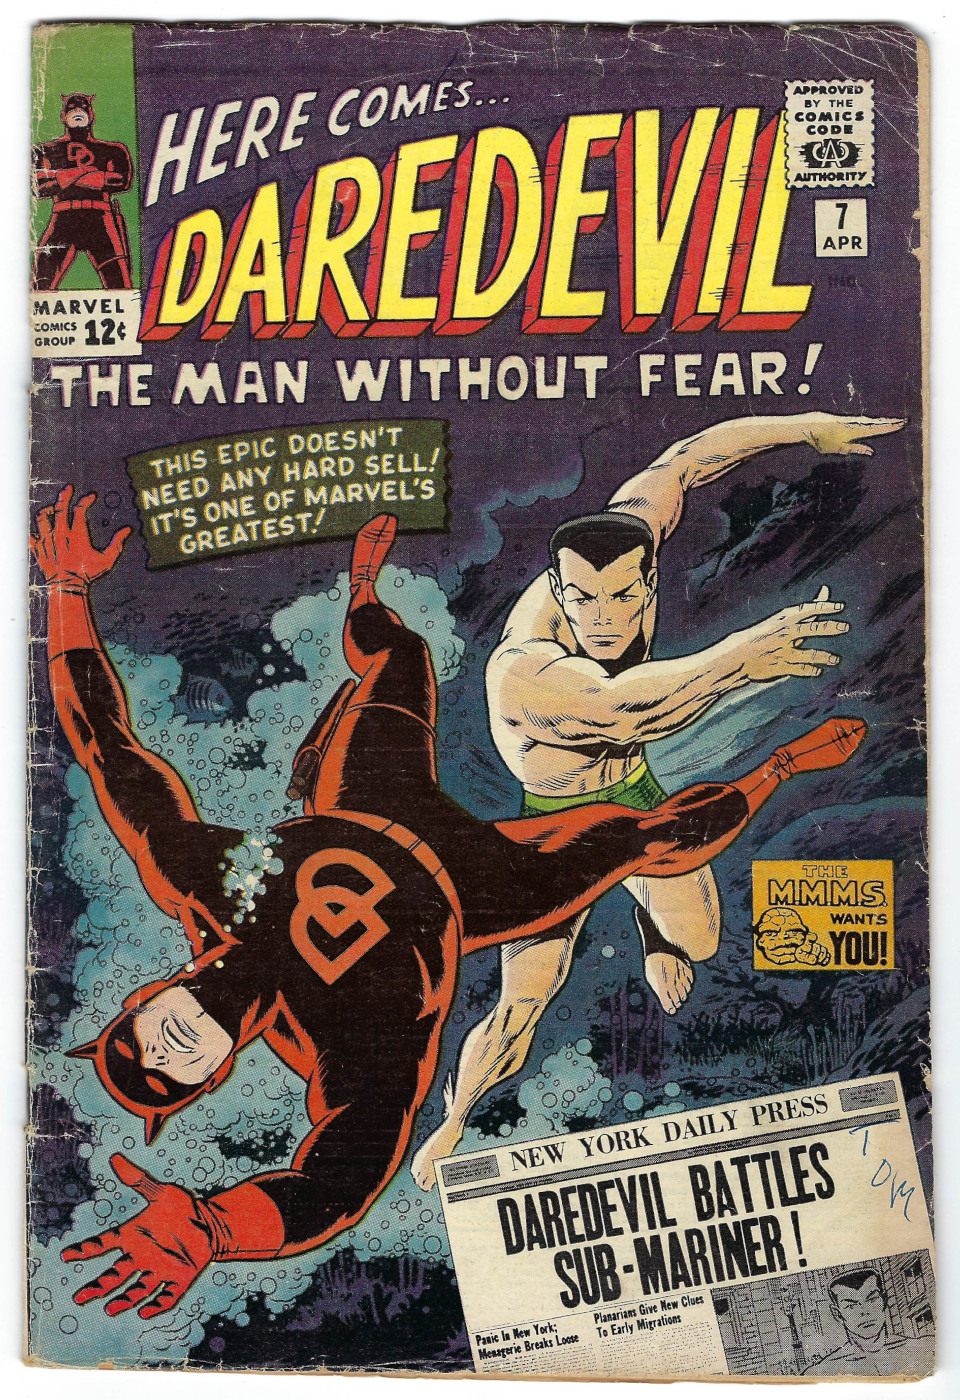 Marvel Comics Daredevil (1964) #7: 1st Appearance of Red Costume